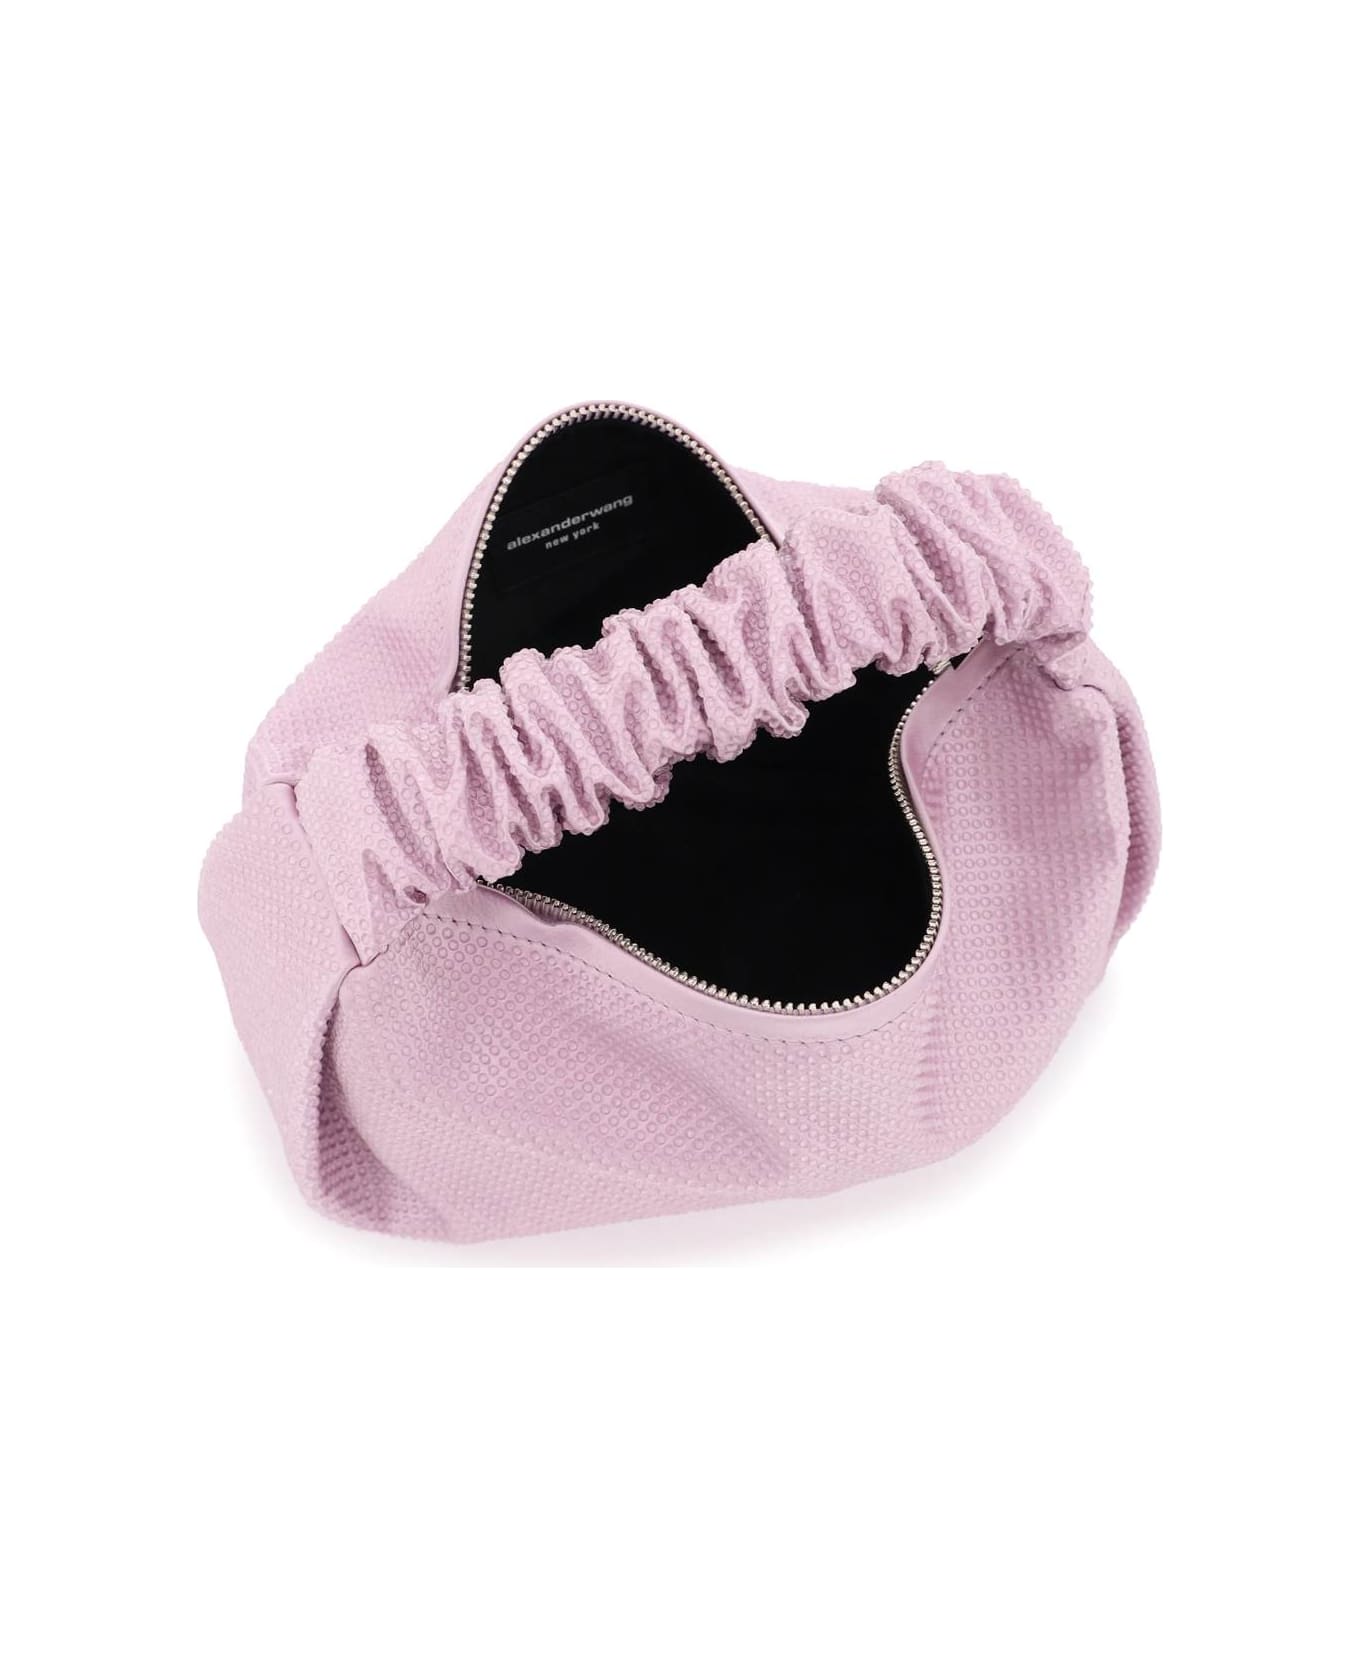 Alexander Wang Scrunchie Mini Bag With Crystals - Winsome Orchid クラッチバッグ